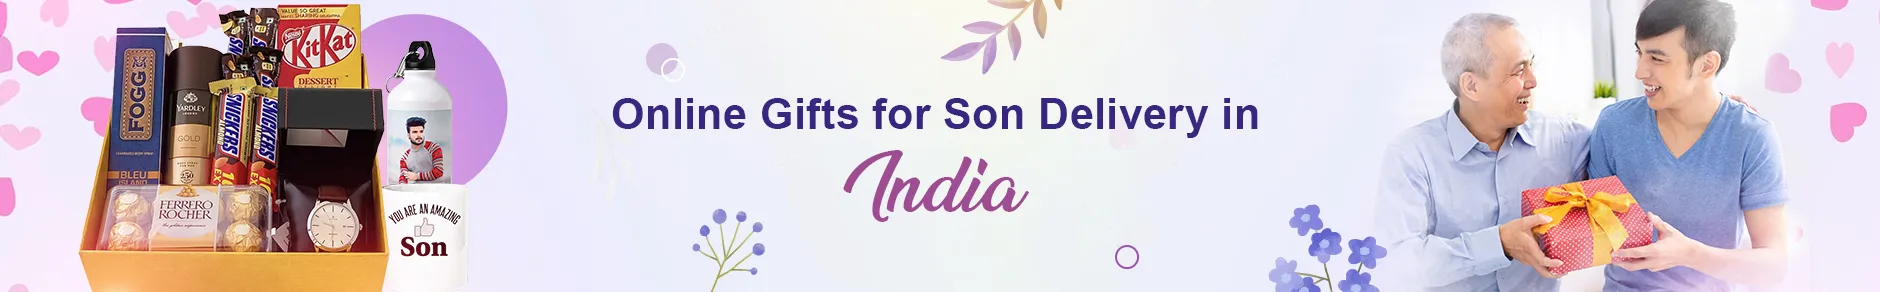 Gifts for Son to India